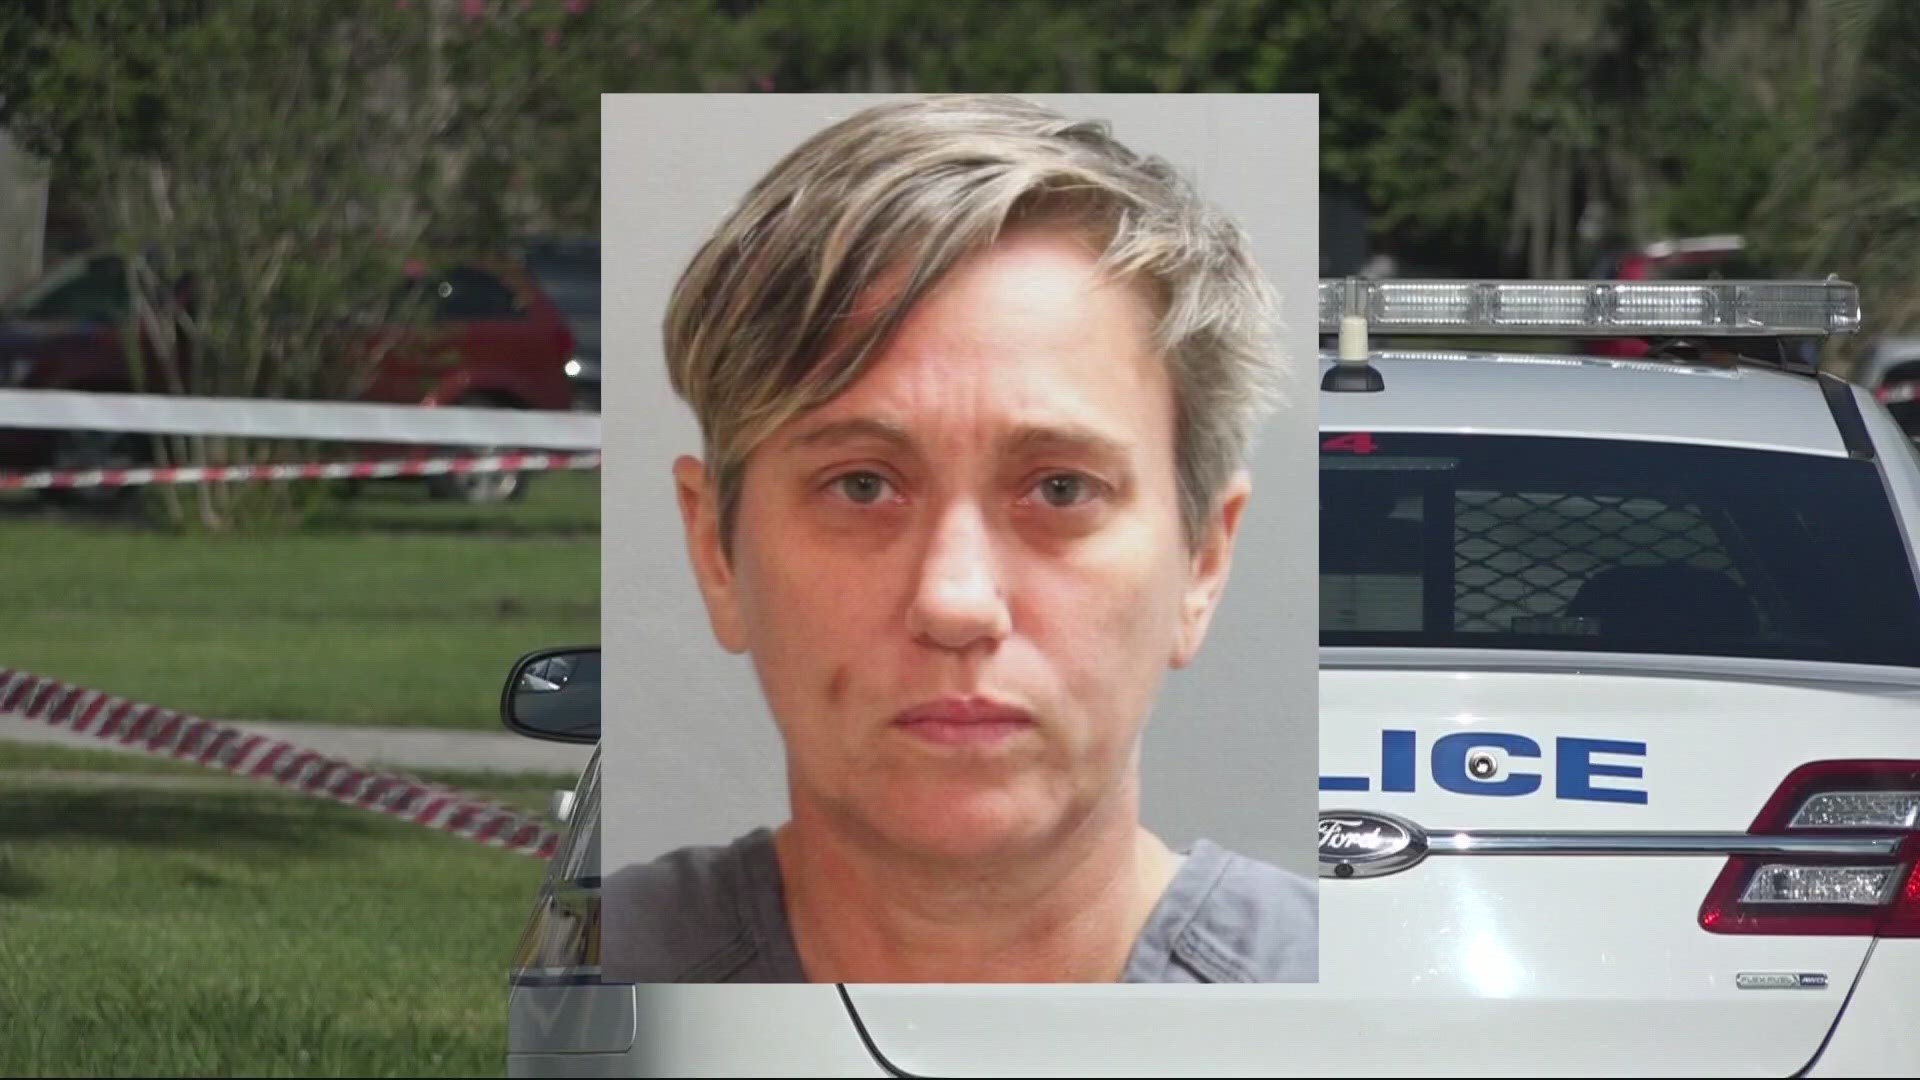 Remains found, missing woman, arrest made in Jacksonville firstcoastnews